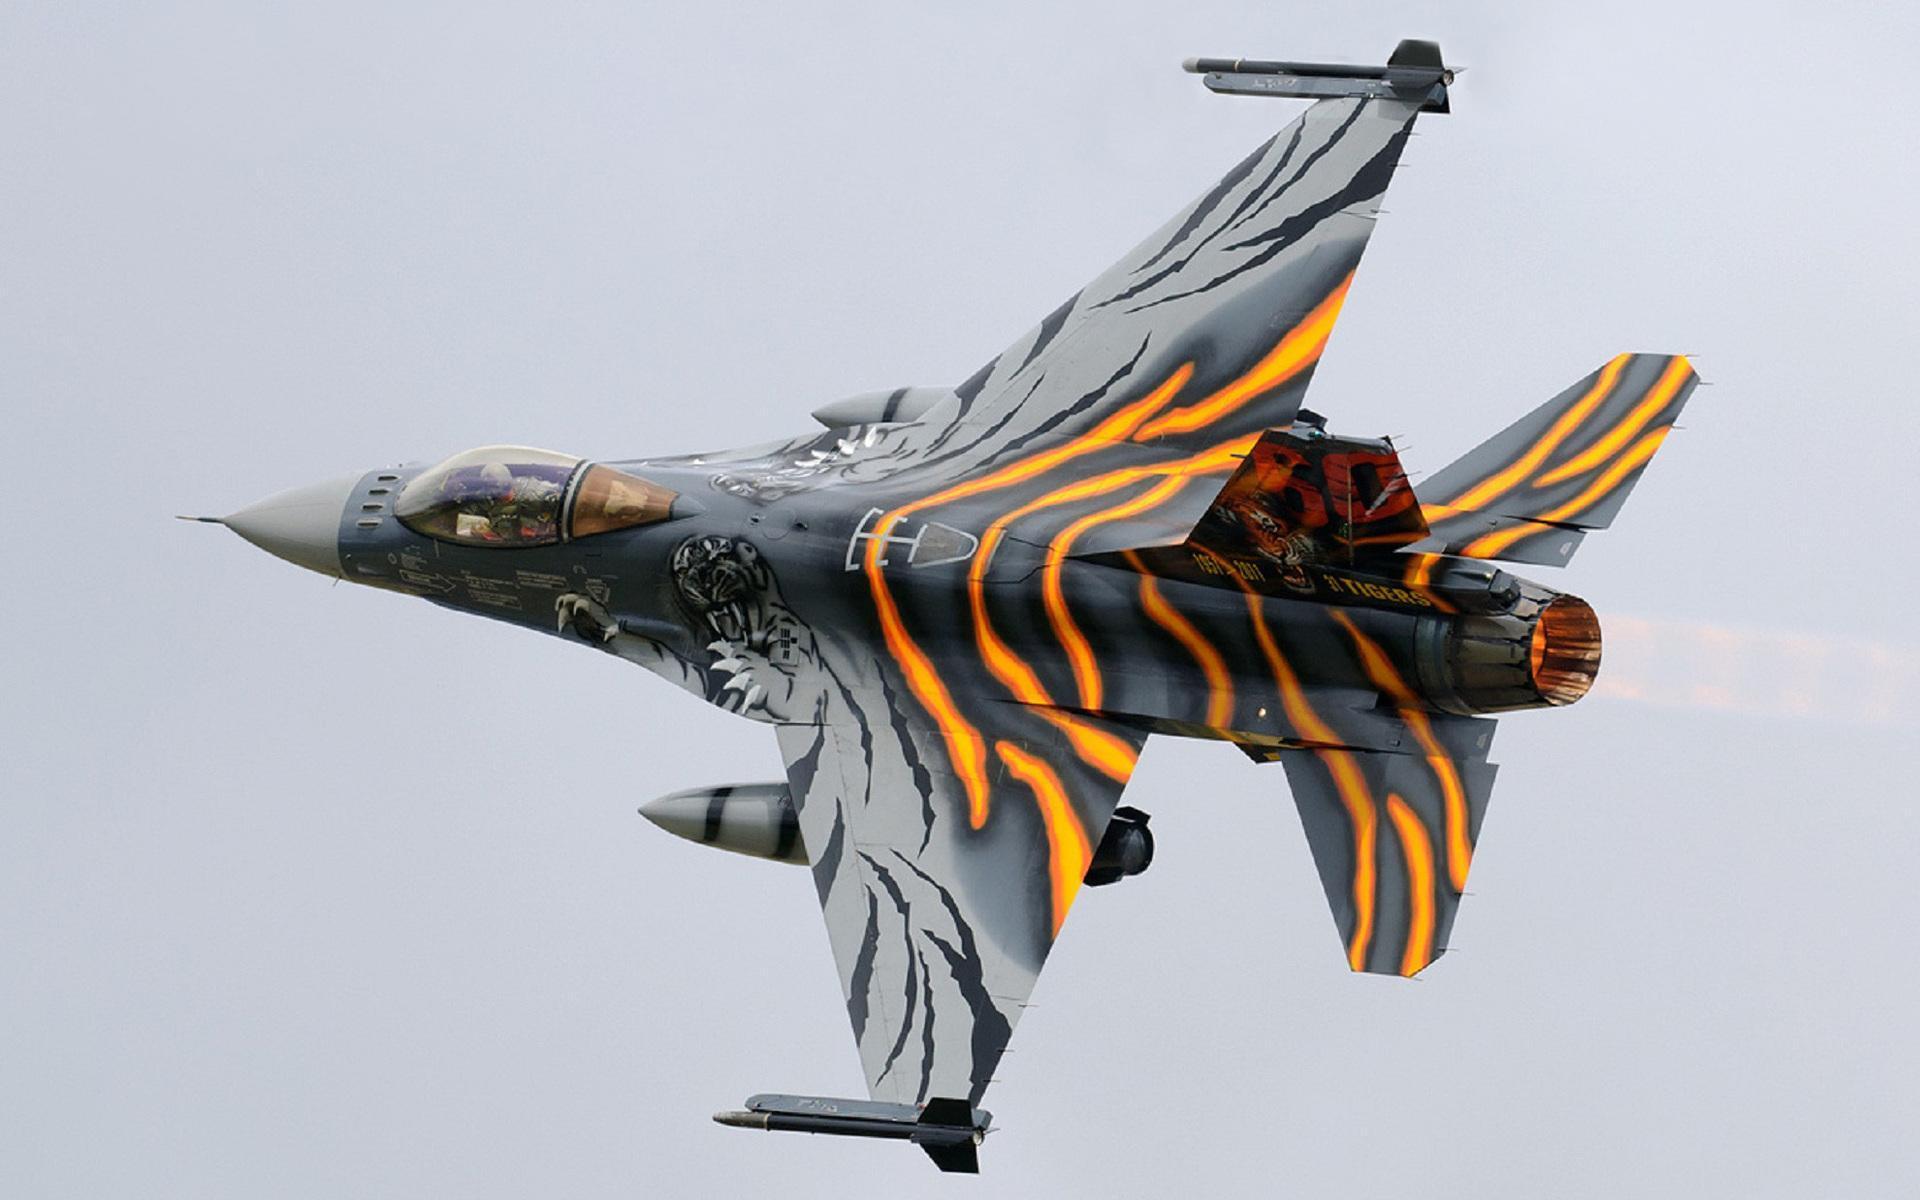 Download Cool F16 Wallpaper 4883 1920x1200 px High Resolution